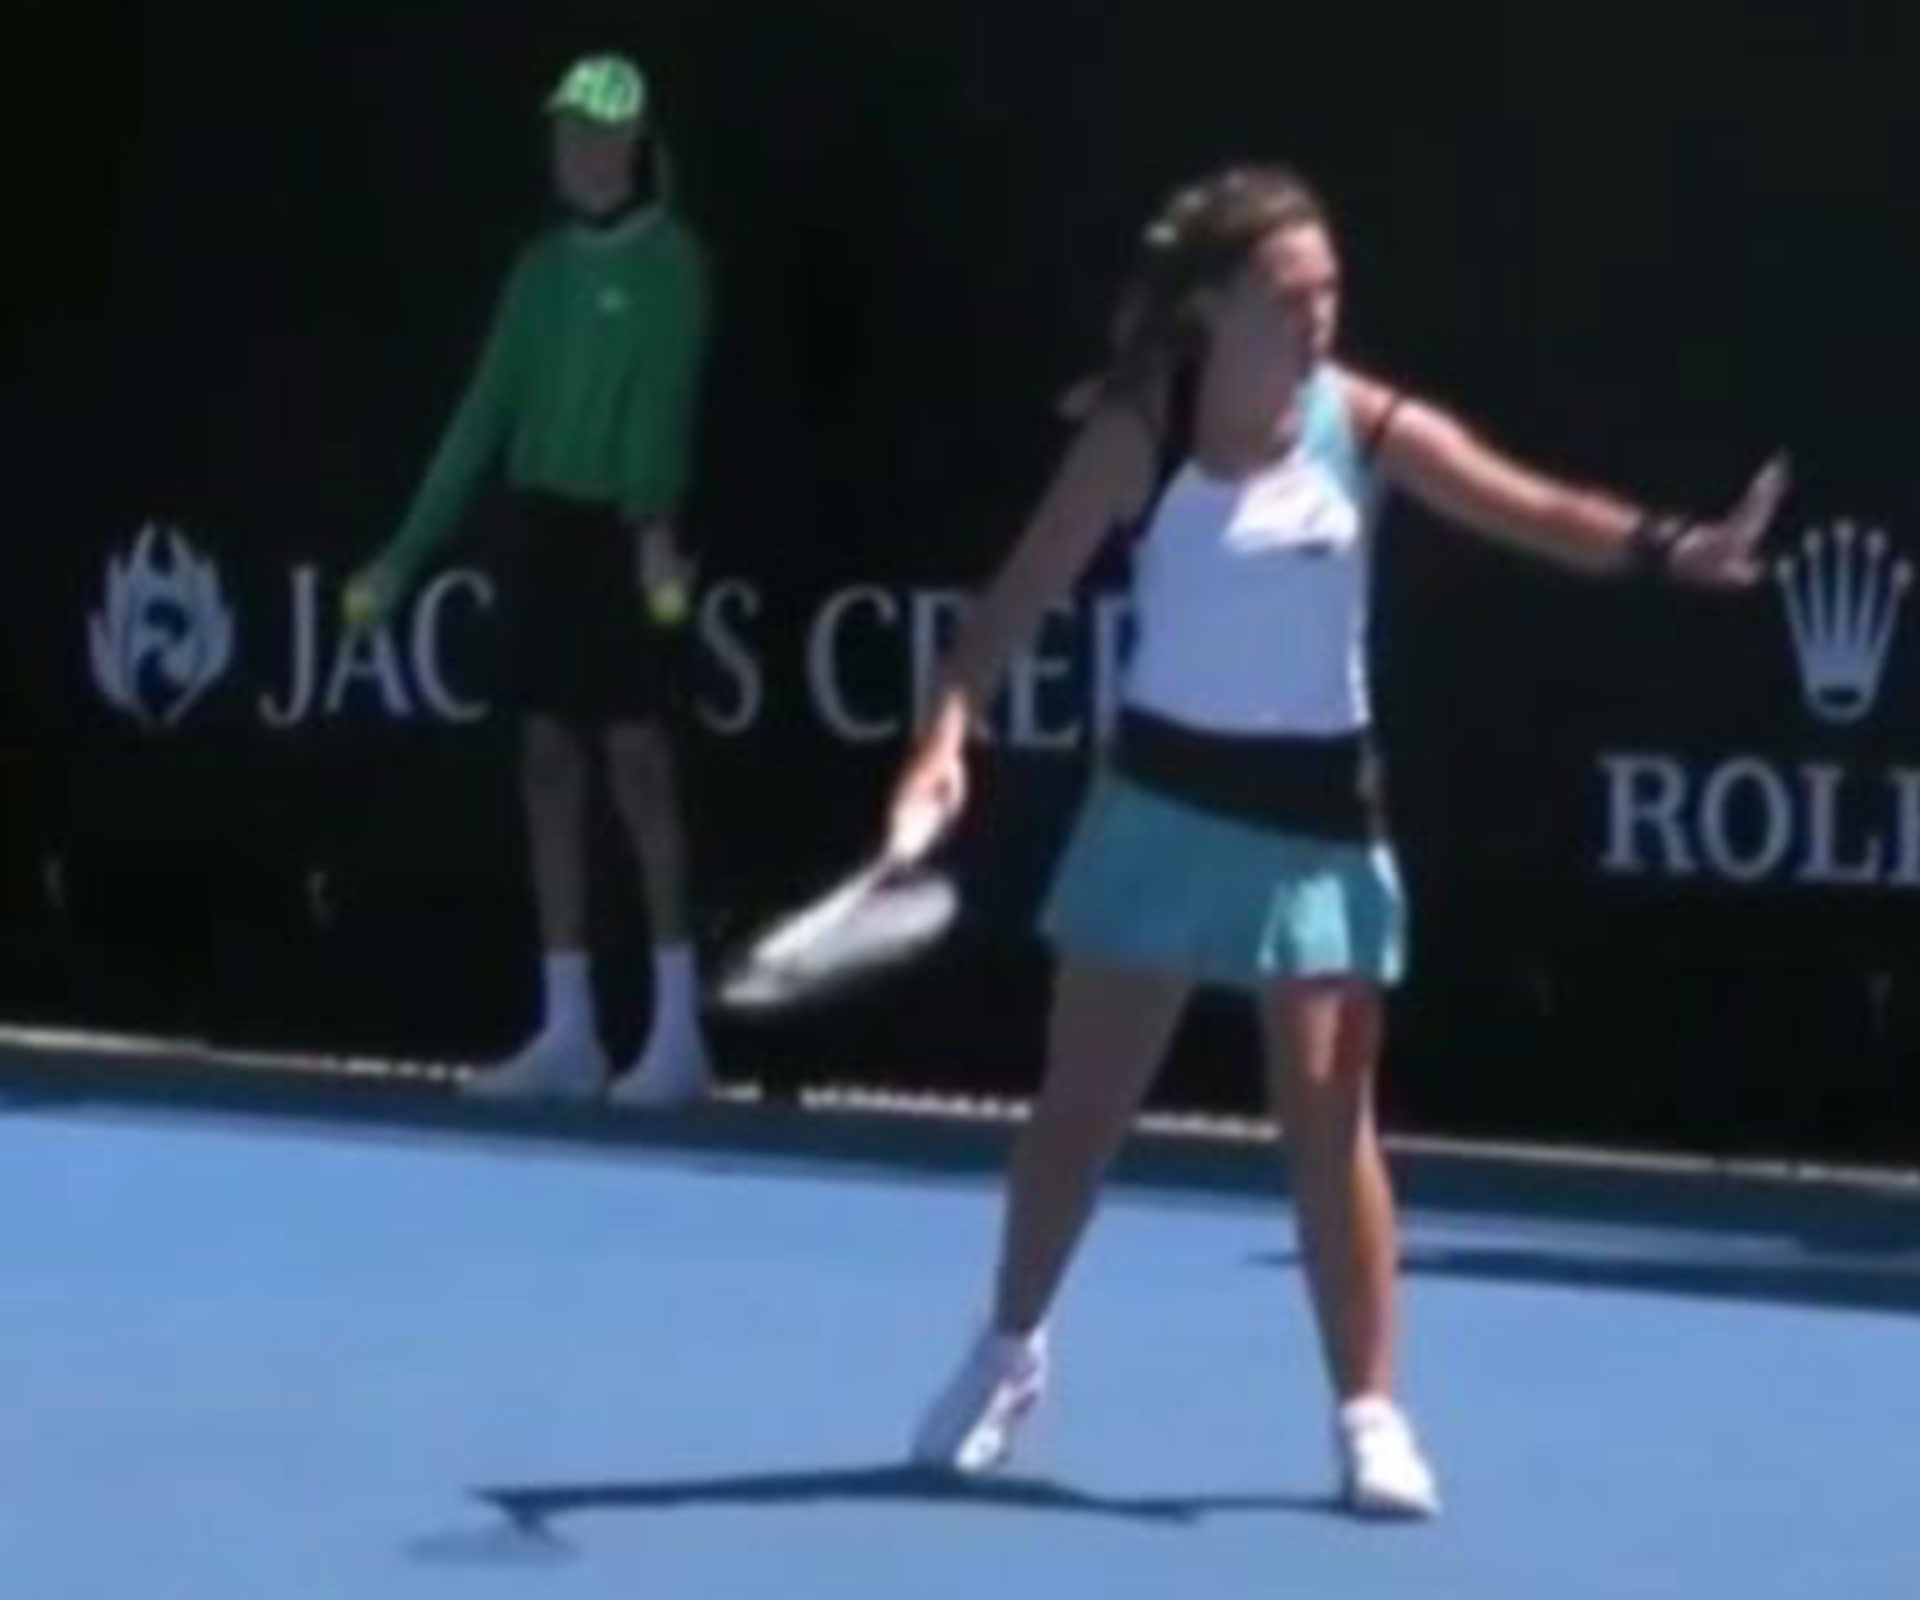 Tennis player disqualified from Australian Open for hitting a ballkid with a ball